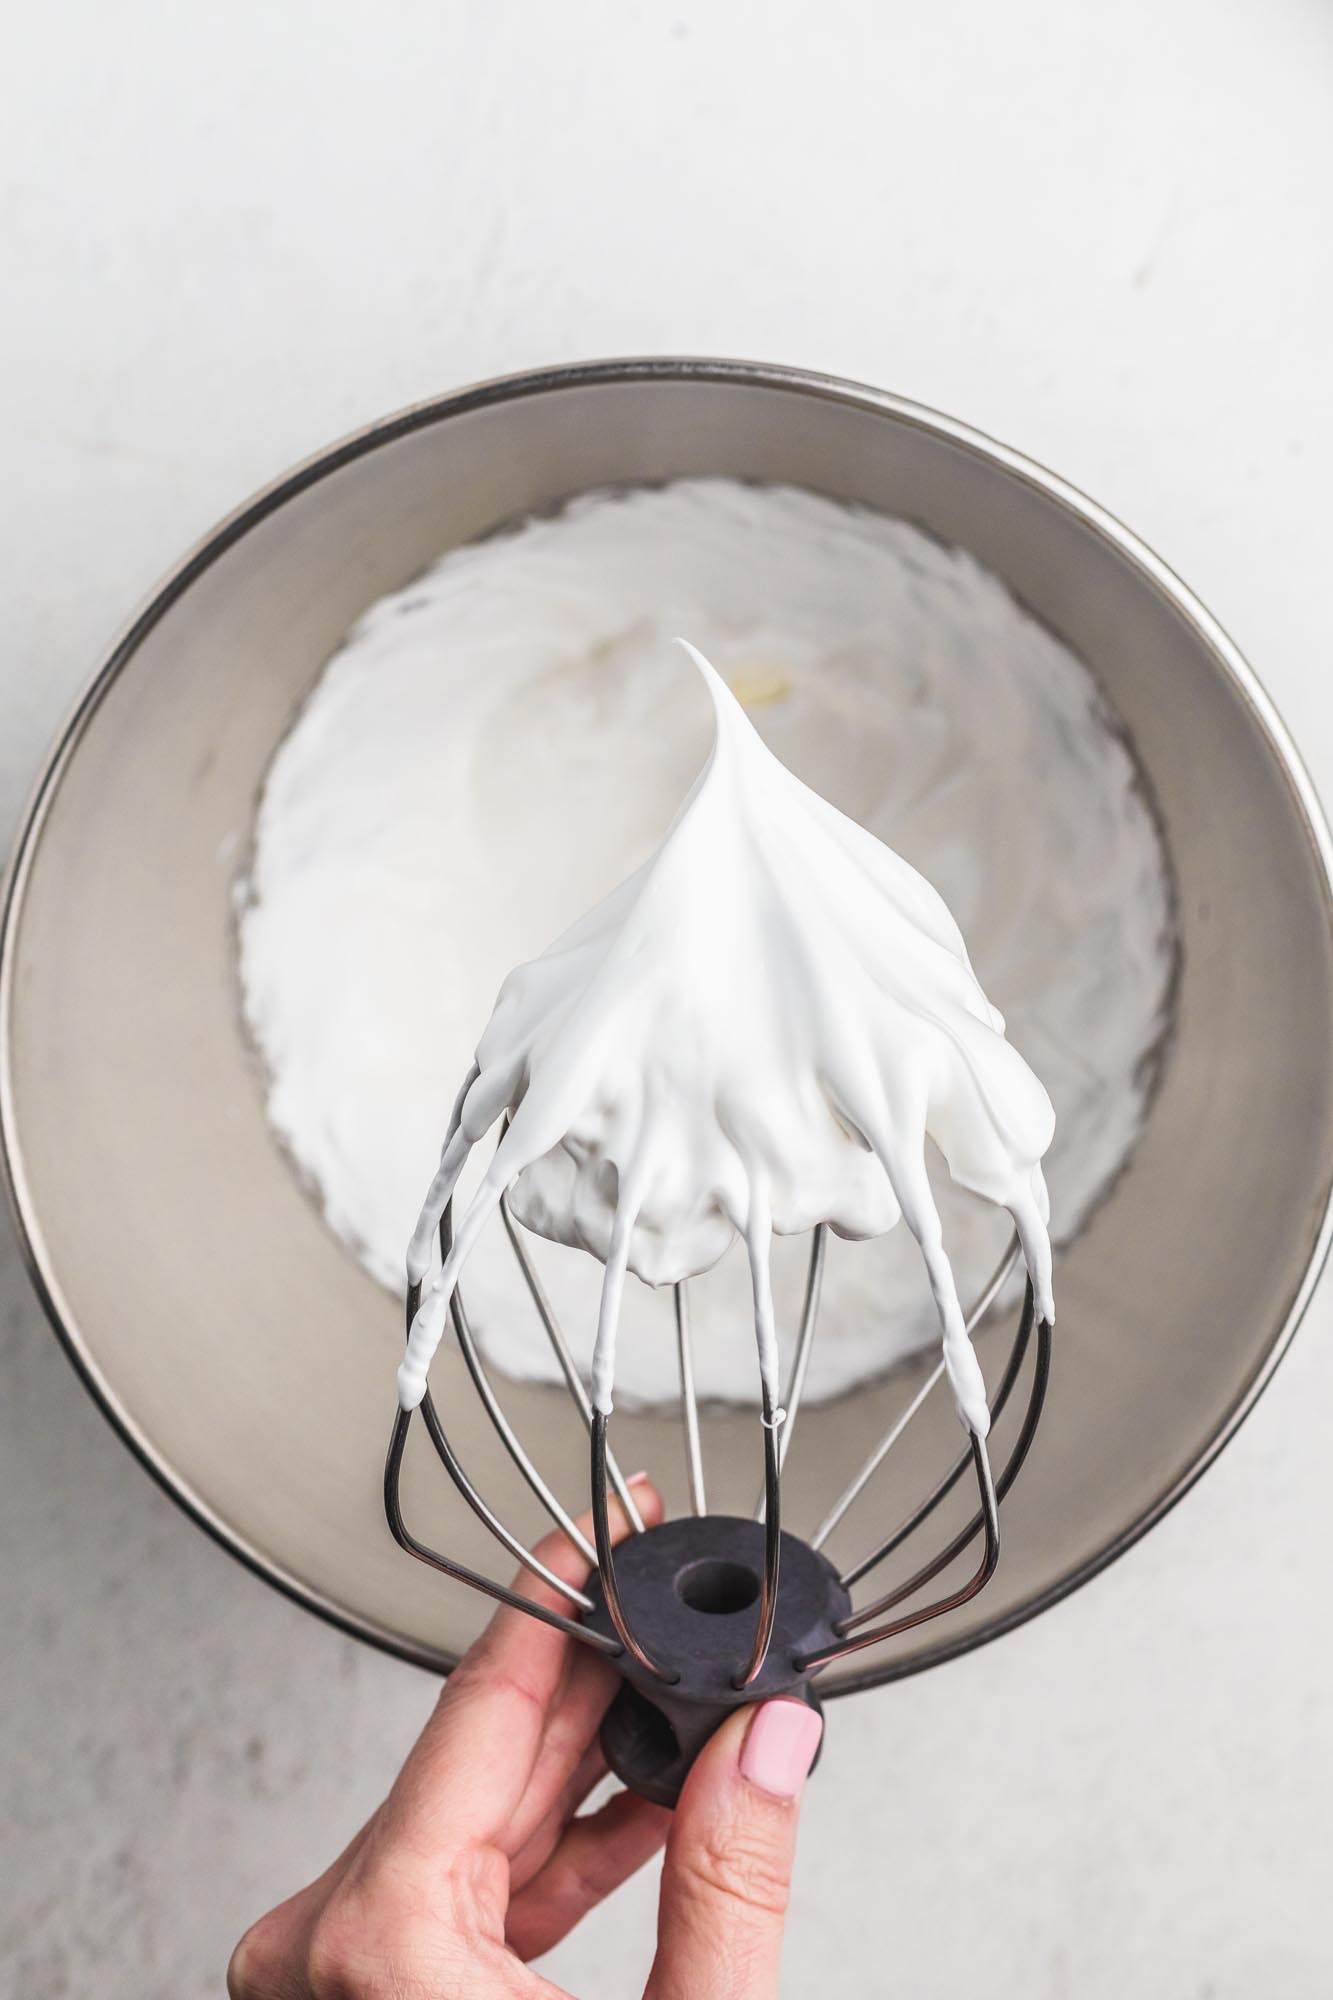 Holding a whisk beater with whipped white meringue over a metal bowl